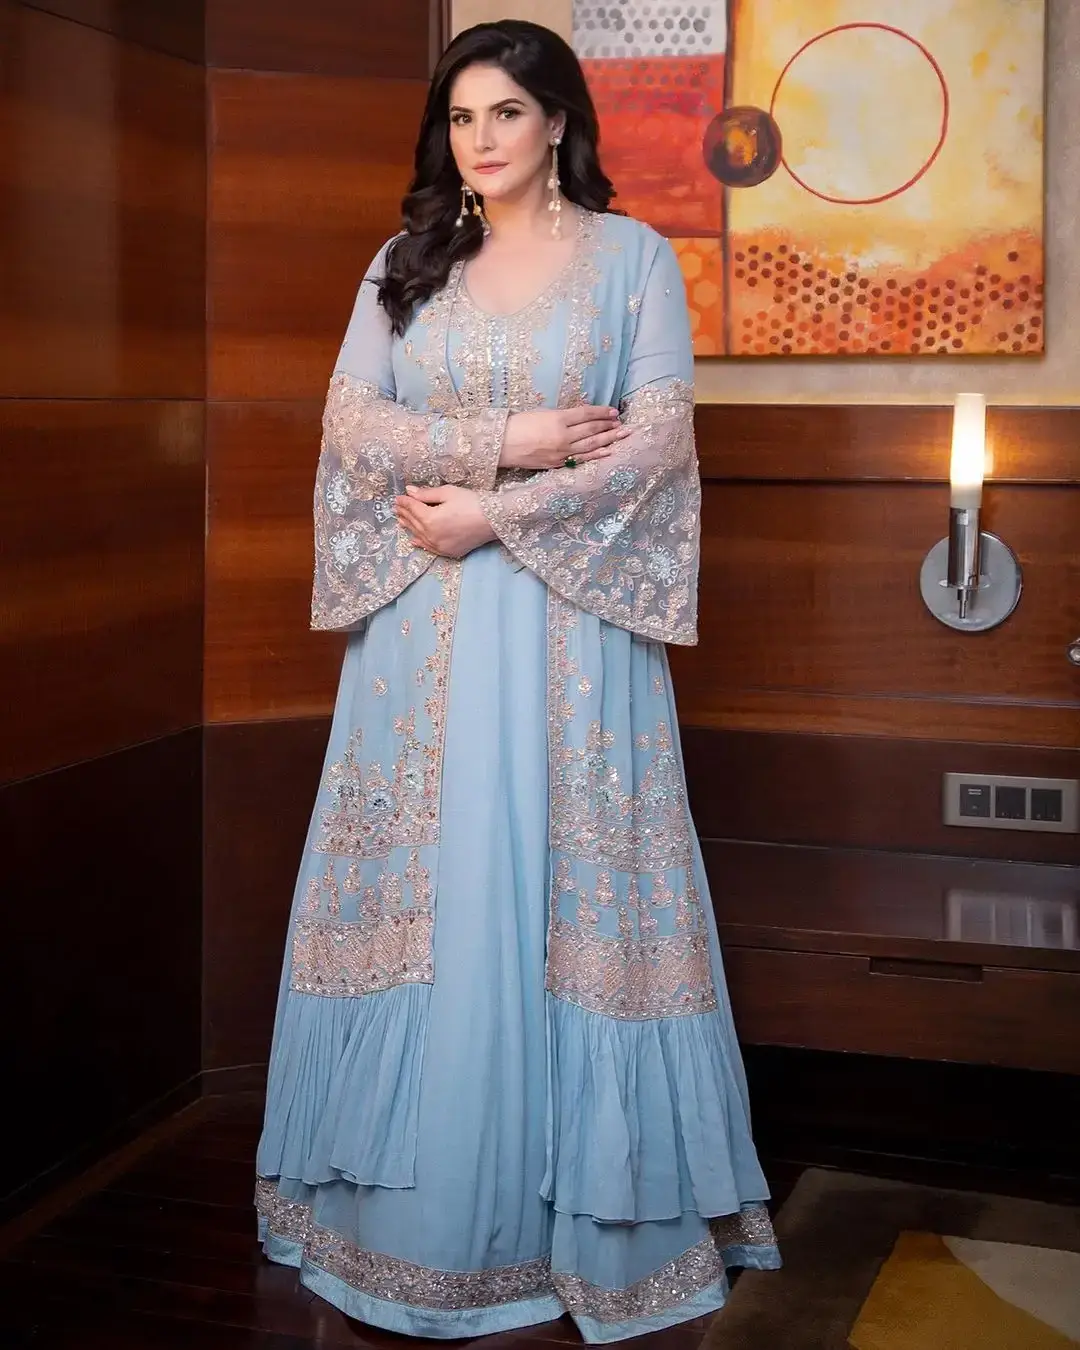 BOLLYWOOD ACTRESS ZAREEN KHAN IMAGES IN BLUE COLOUR GOWN 6